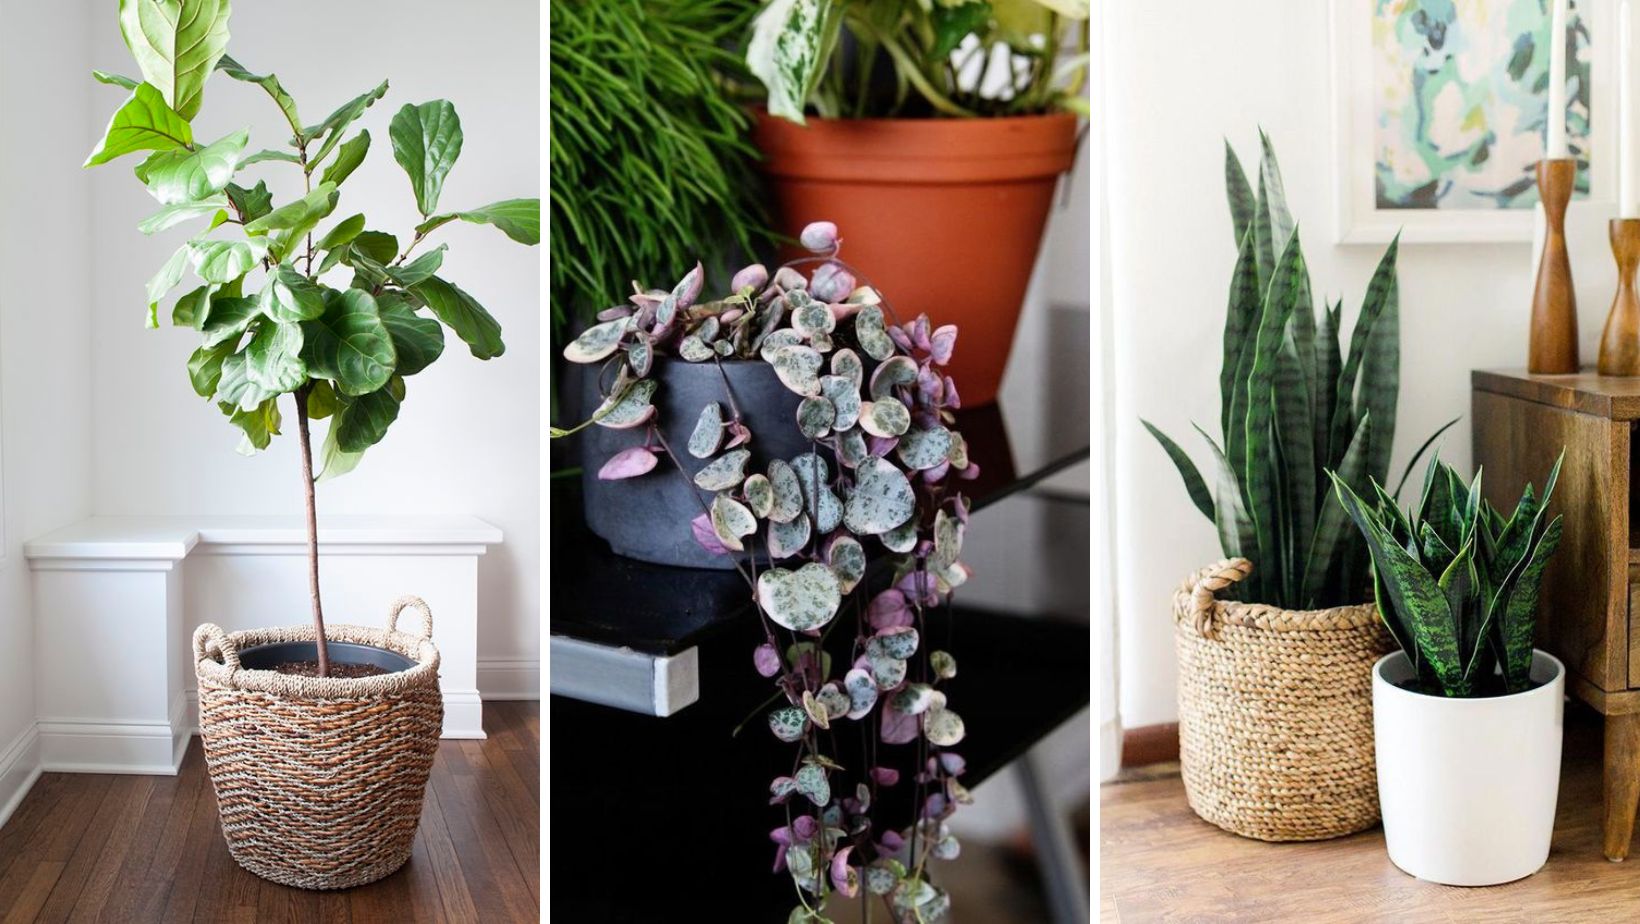 The-15-plants-to-complete-the-70s-look-in-your-home